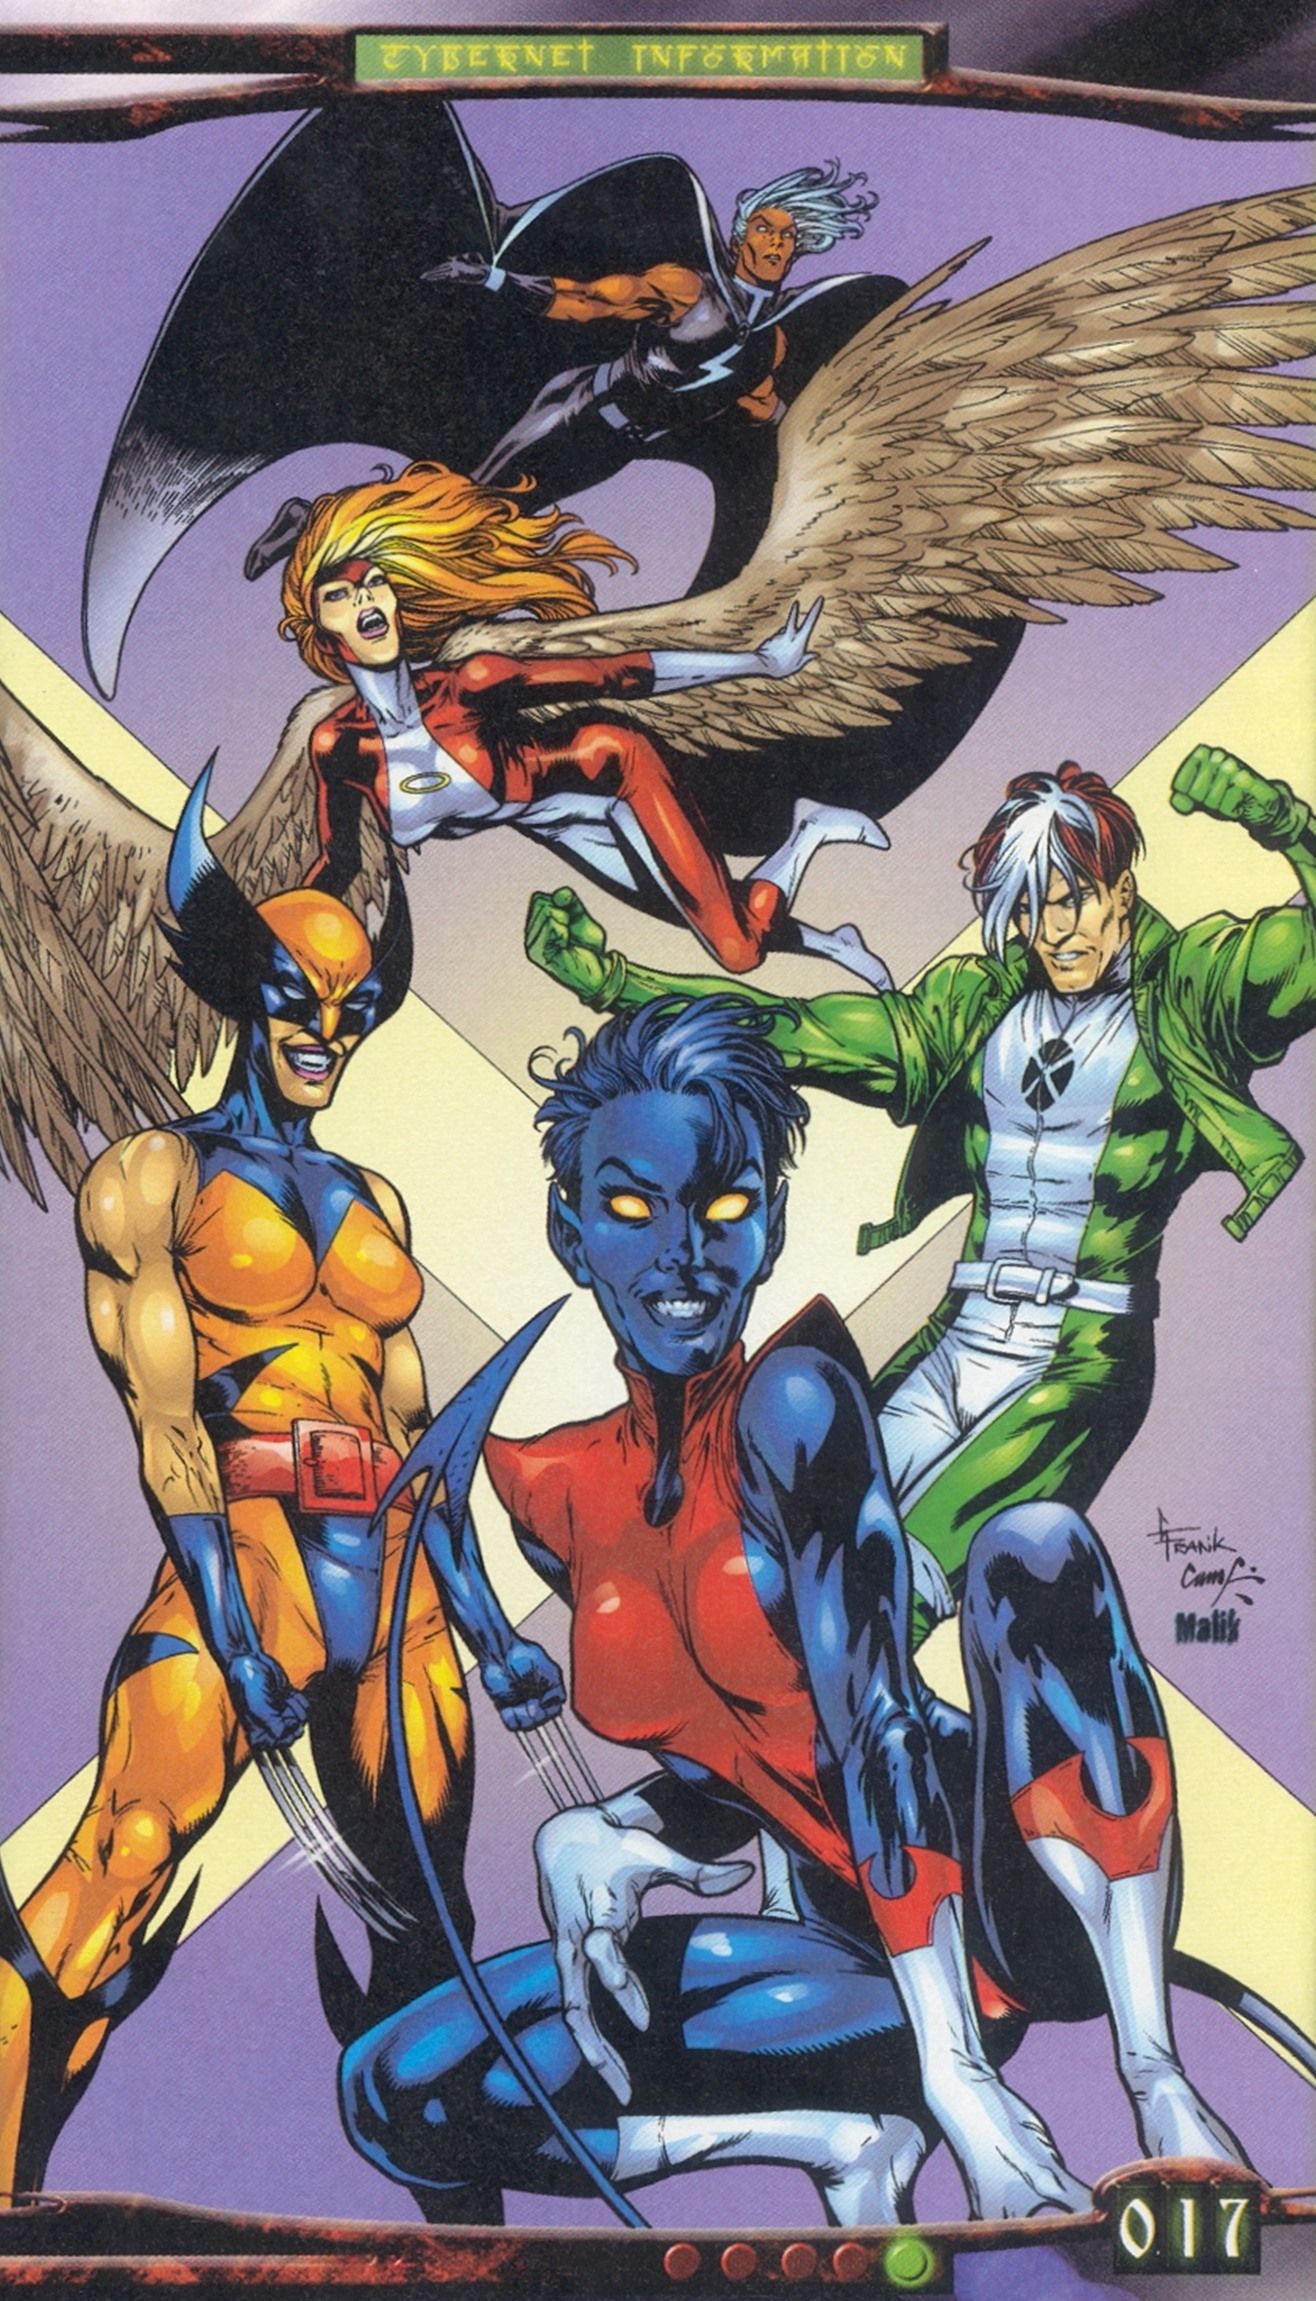 Marvel’s Gender-Flipped X-Men Look More Badass Than Fans Expect